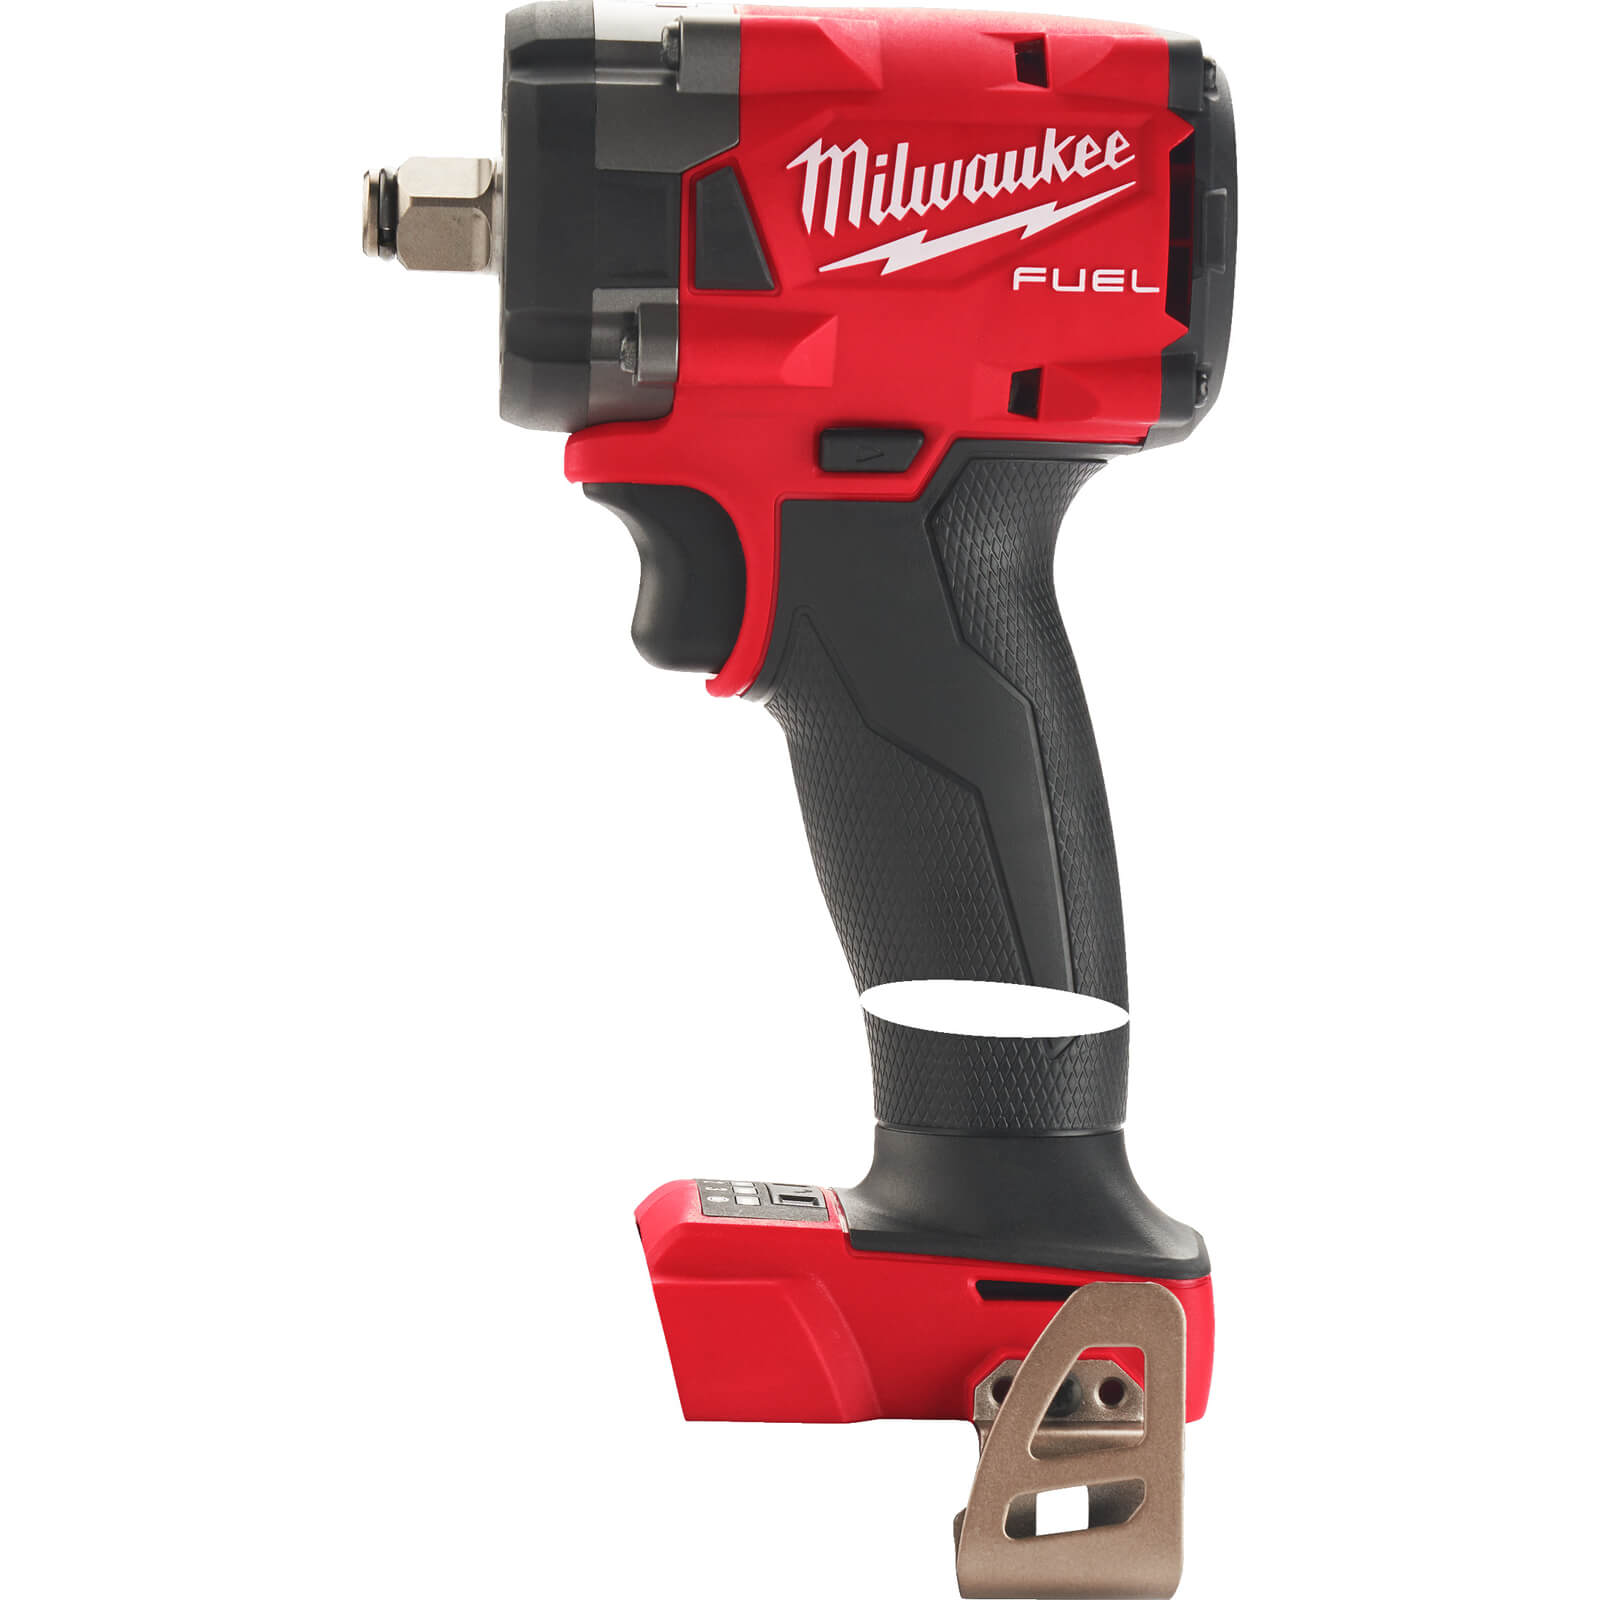 Image of Milwaukee M18 FIW2F12 Fuel 18v Cordless Brushless 1/2" Drive Impact Wrench No Batteries No Charger Case